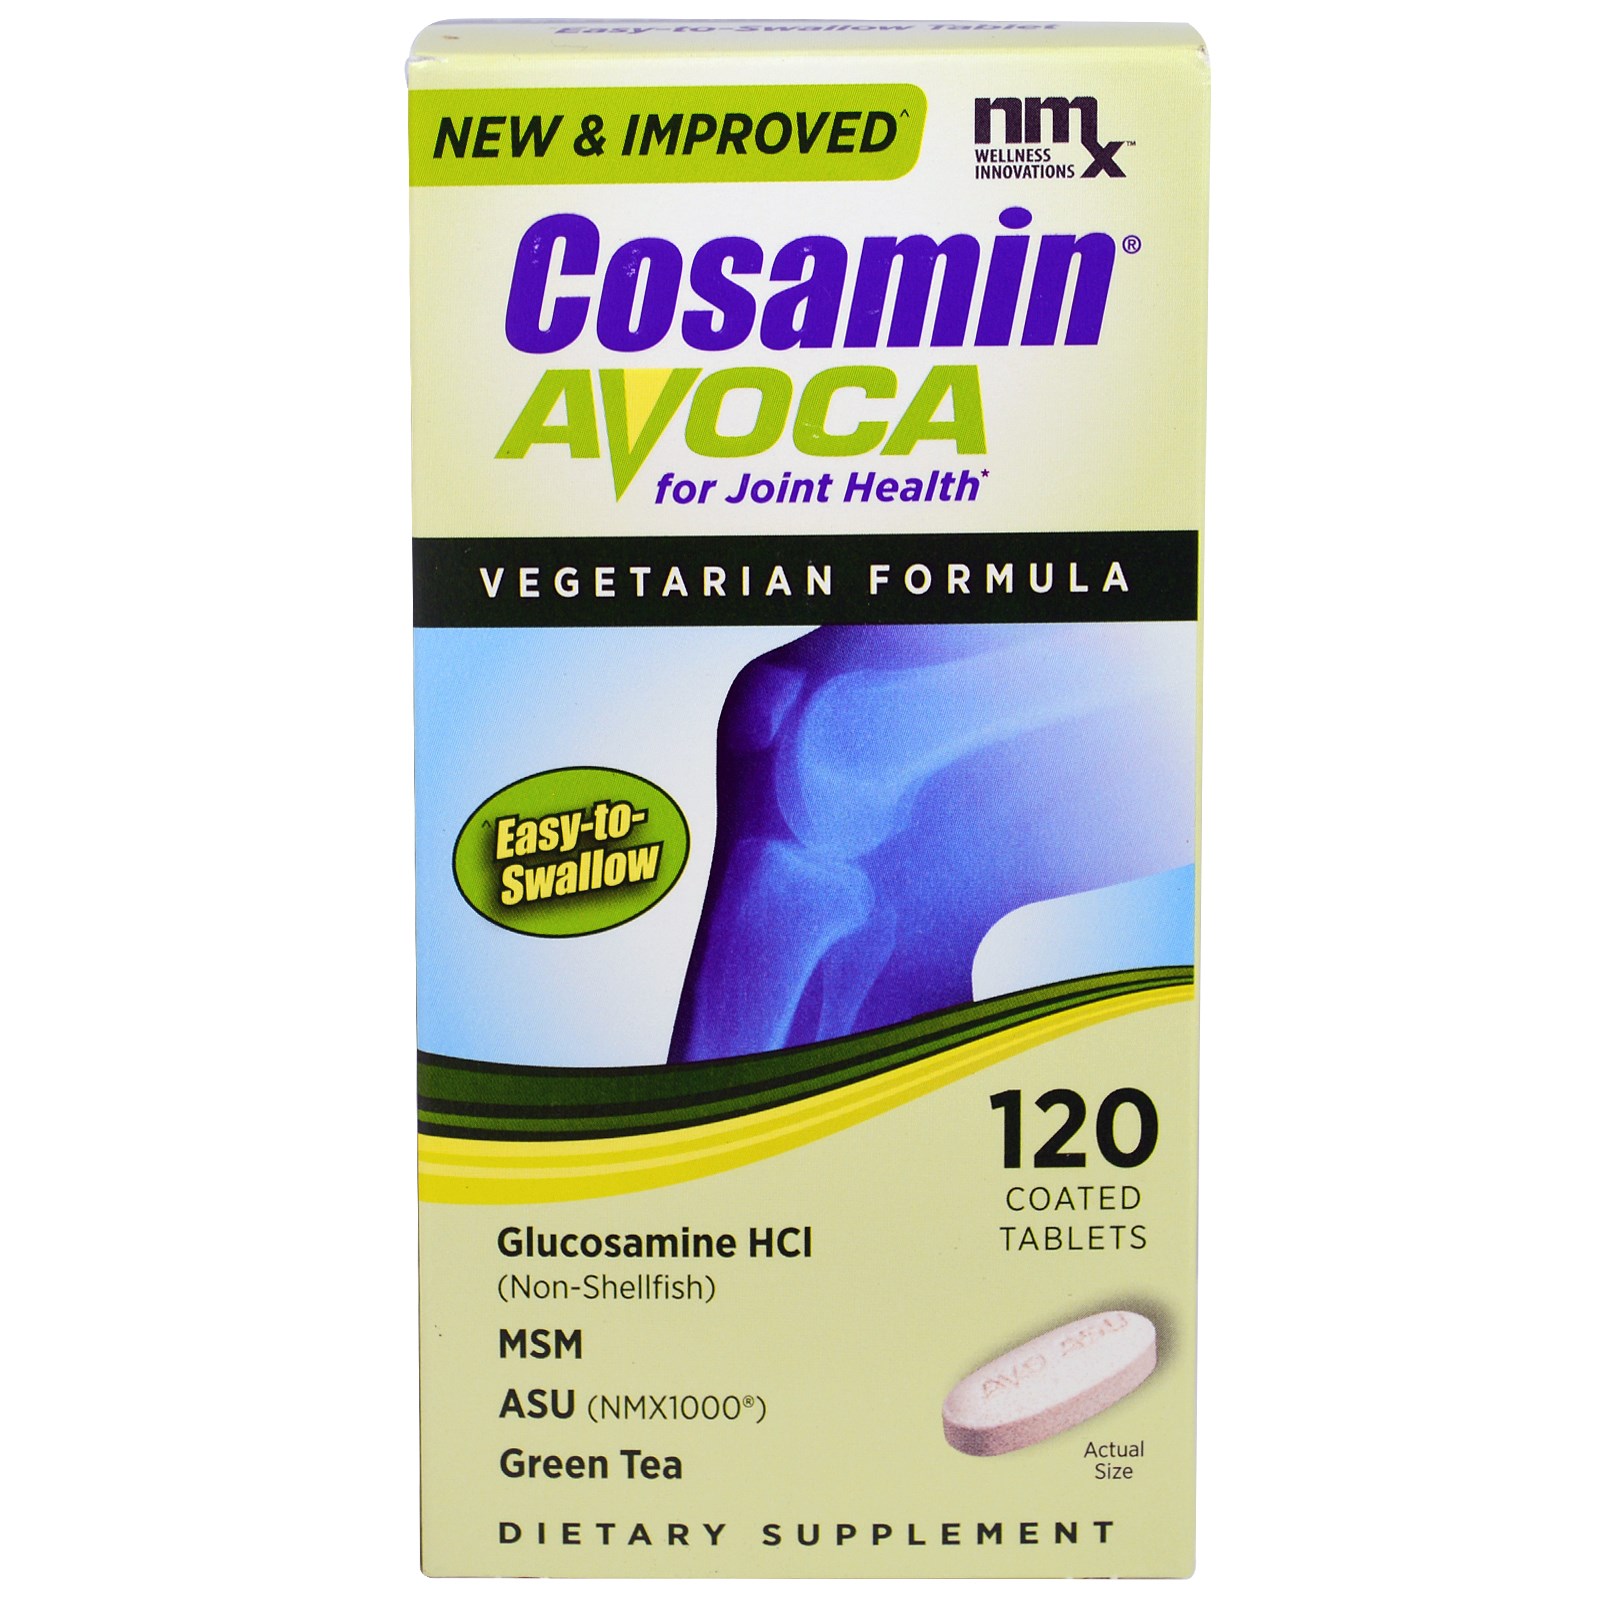 Nutramax Cosamin Avoca For Joint Health 120 Coated Tablets IHerb